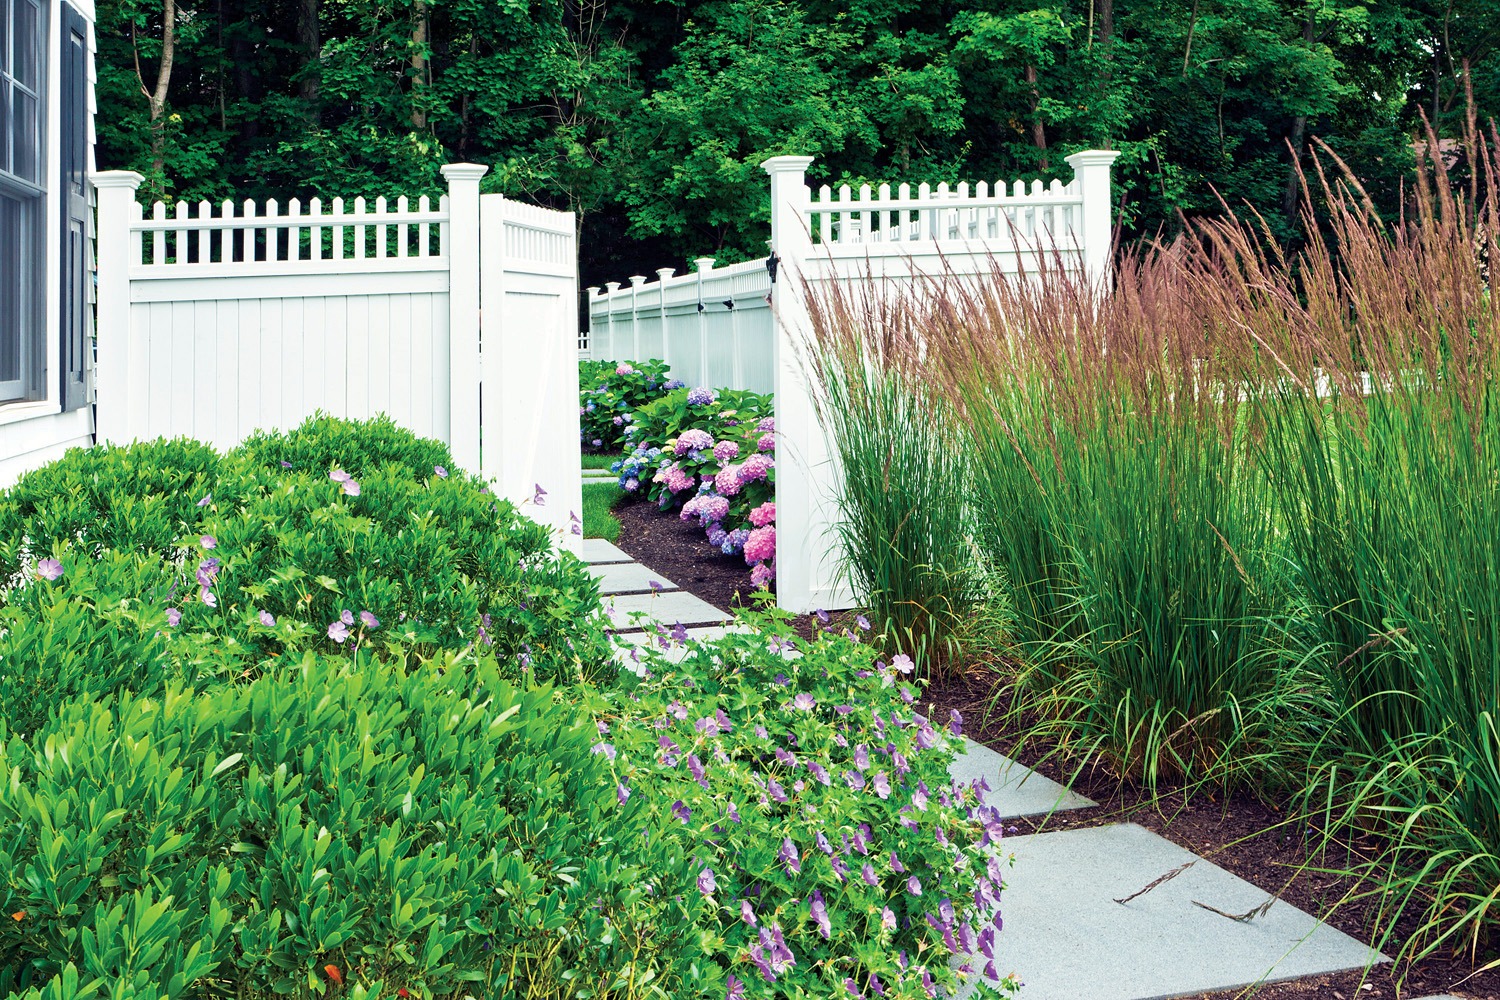 A well-manicured garden featuring a white picket fence, hydrangea bushes, tall grasses, purple flowers, and a partial view of a house.